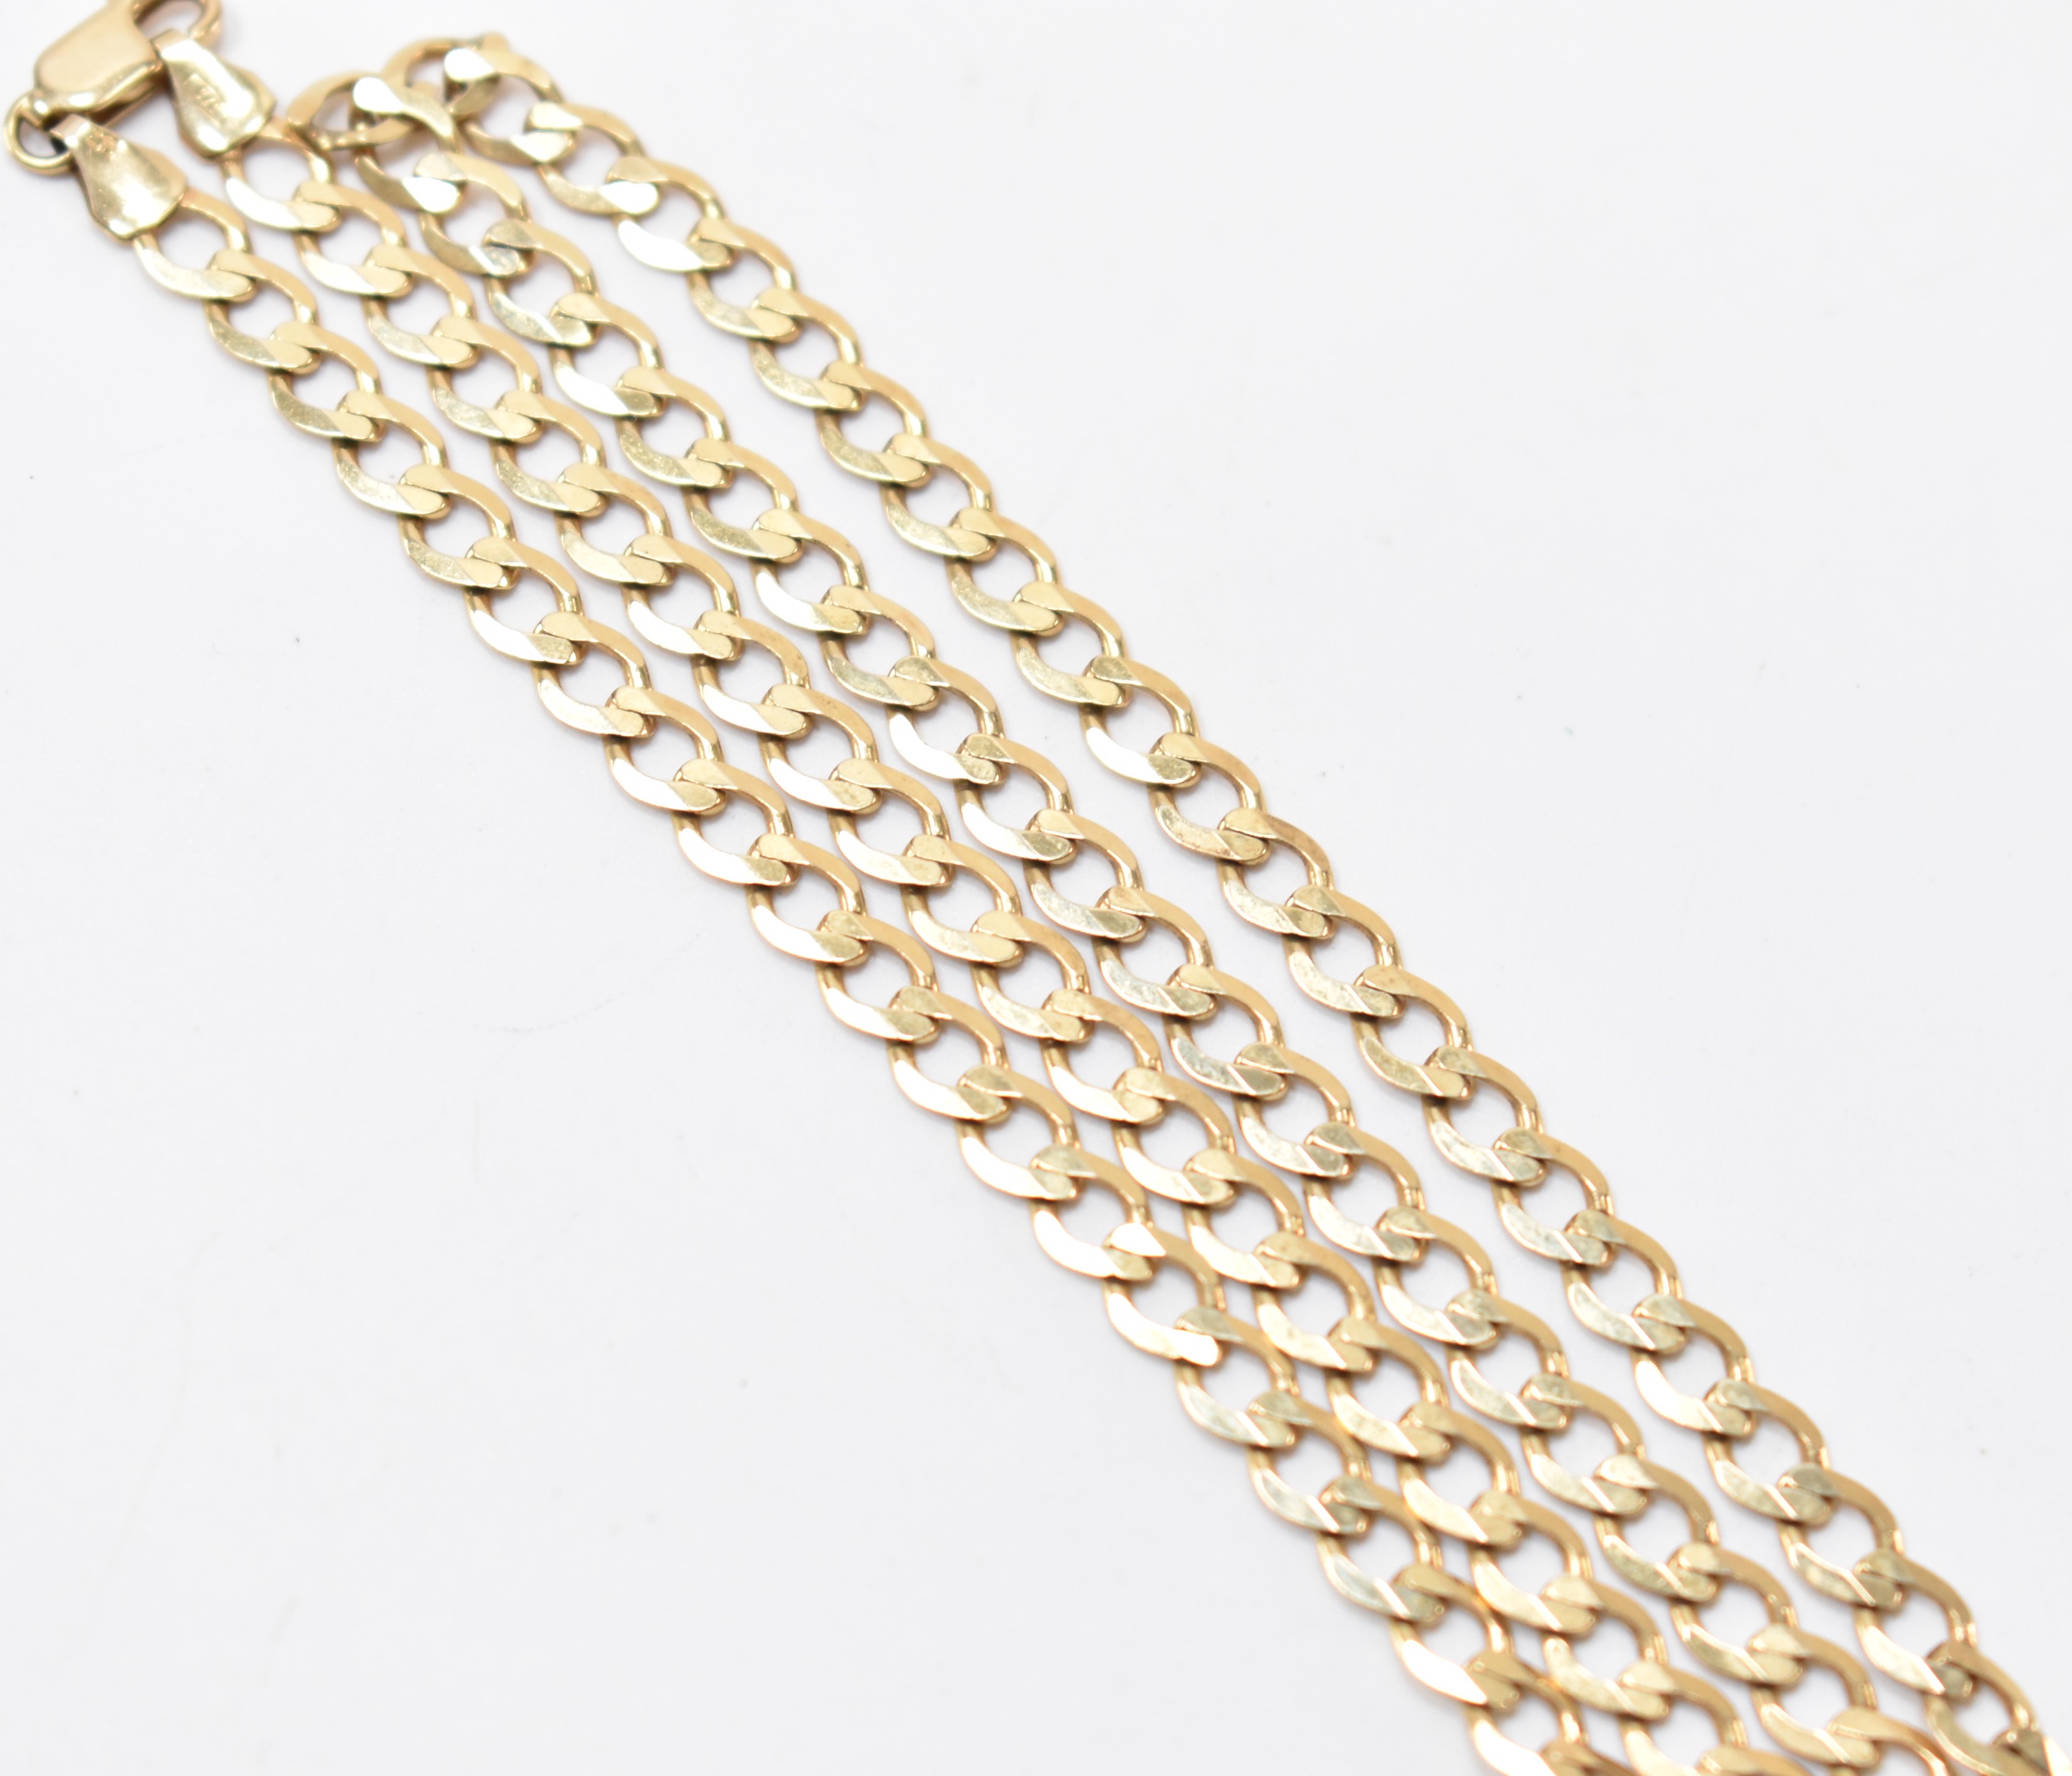 HALLMARKED 9CT GOLD FLAT LINK NECKLACE CHAIN - Image 3 of 5